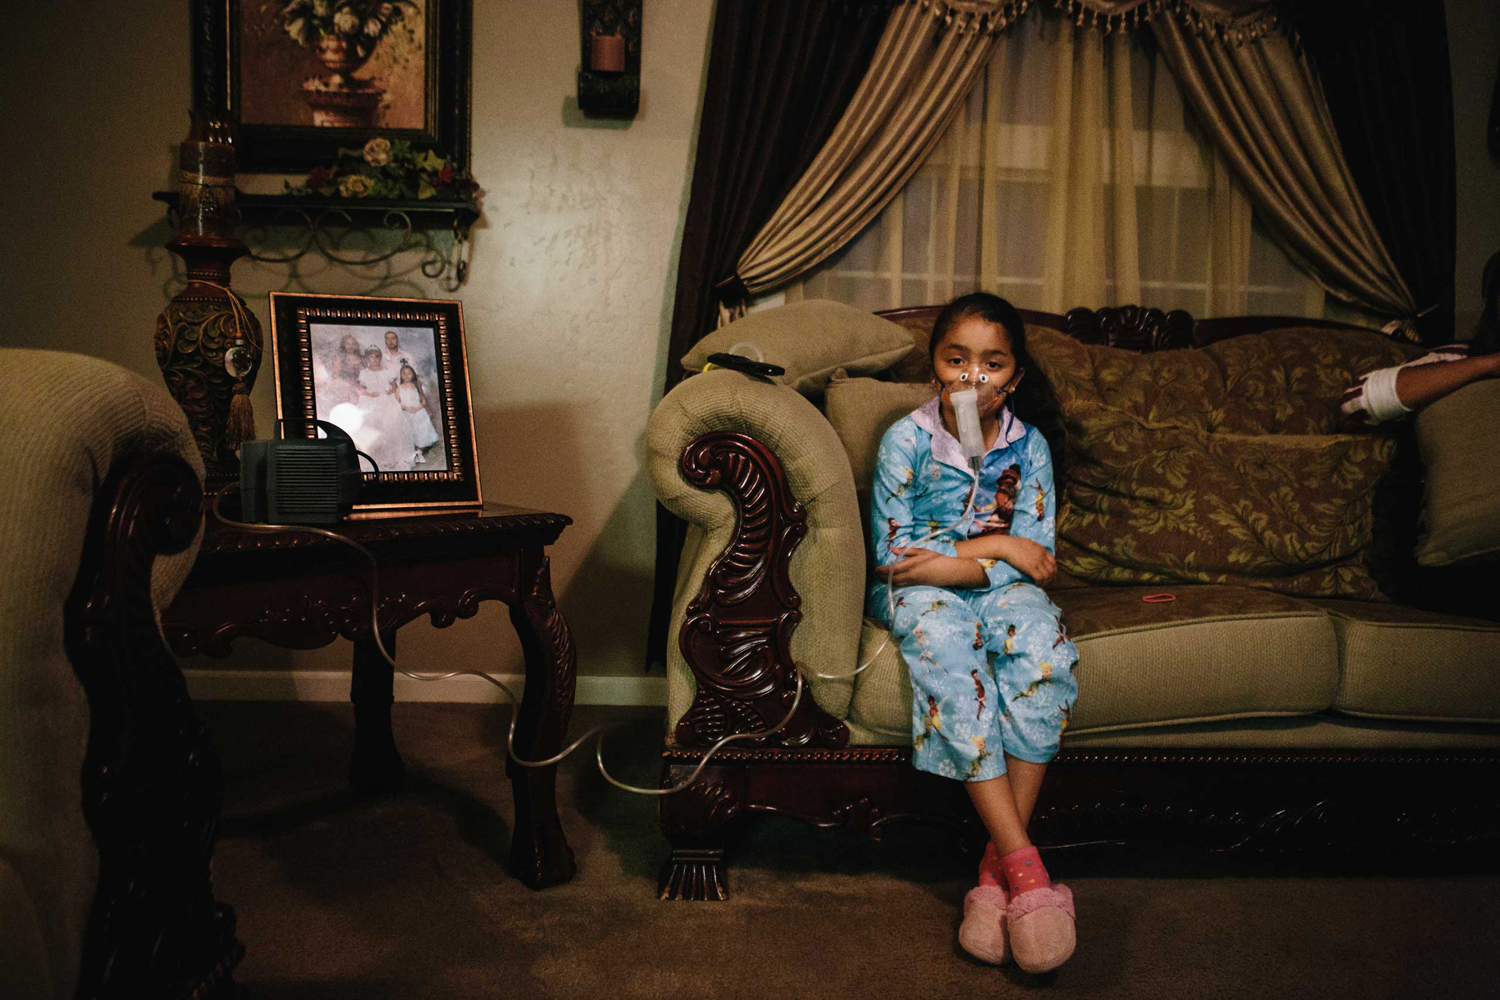 Yareli Gonzalez, 7, suffers from asthma and receives two nebulizer treatments per day, indefinitely. Gonzalez lives in Shafter, a rural farming town in Kern County, Calif. Kern County sits at the southern end of the San Joaquin Valley, an area known for having the worst air in the nation due to dust, smog and high levels of ozone.